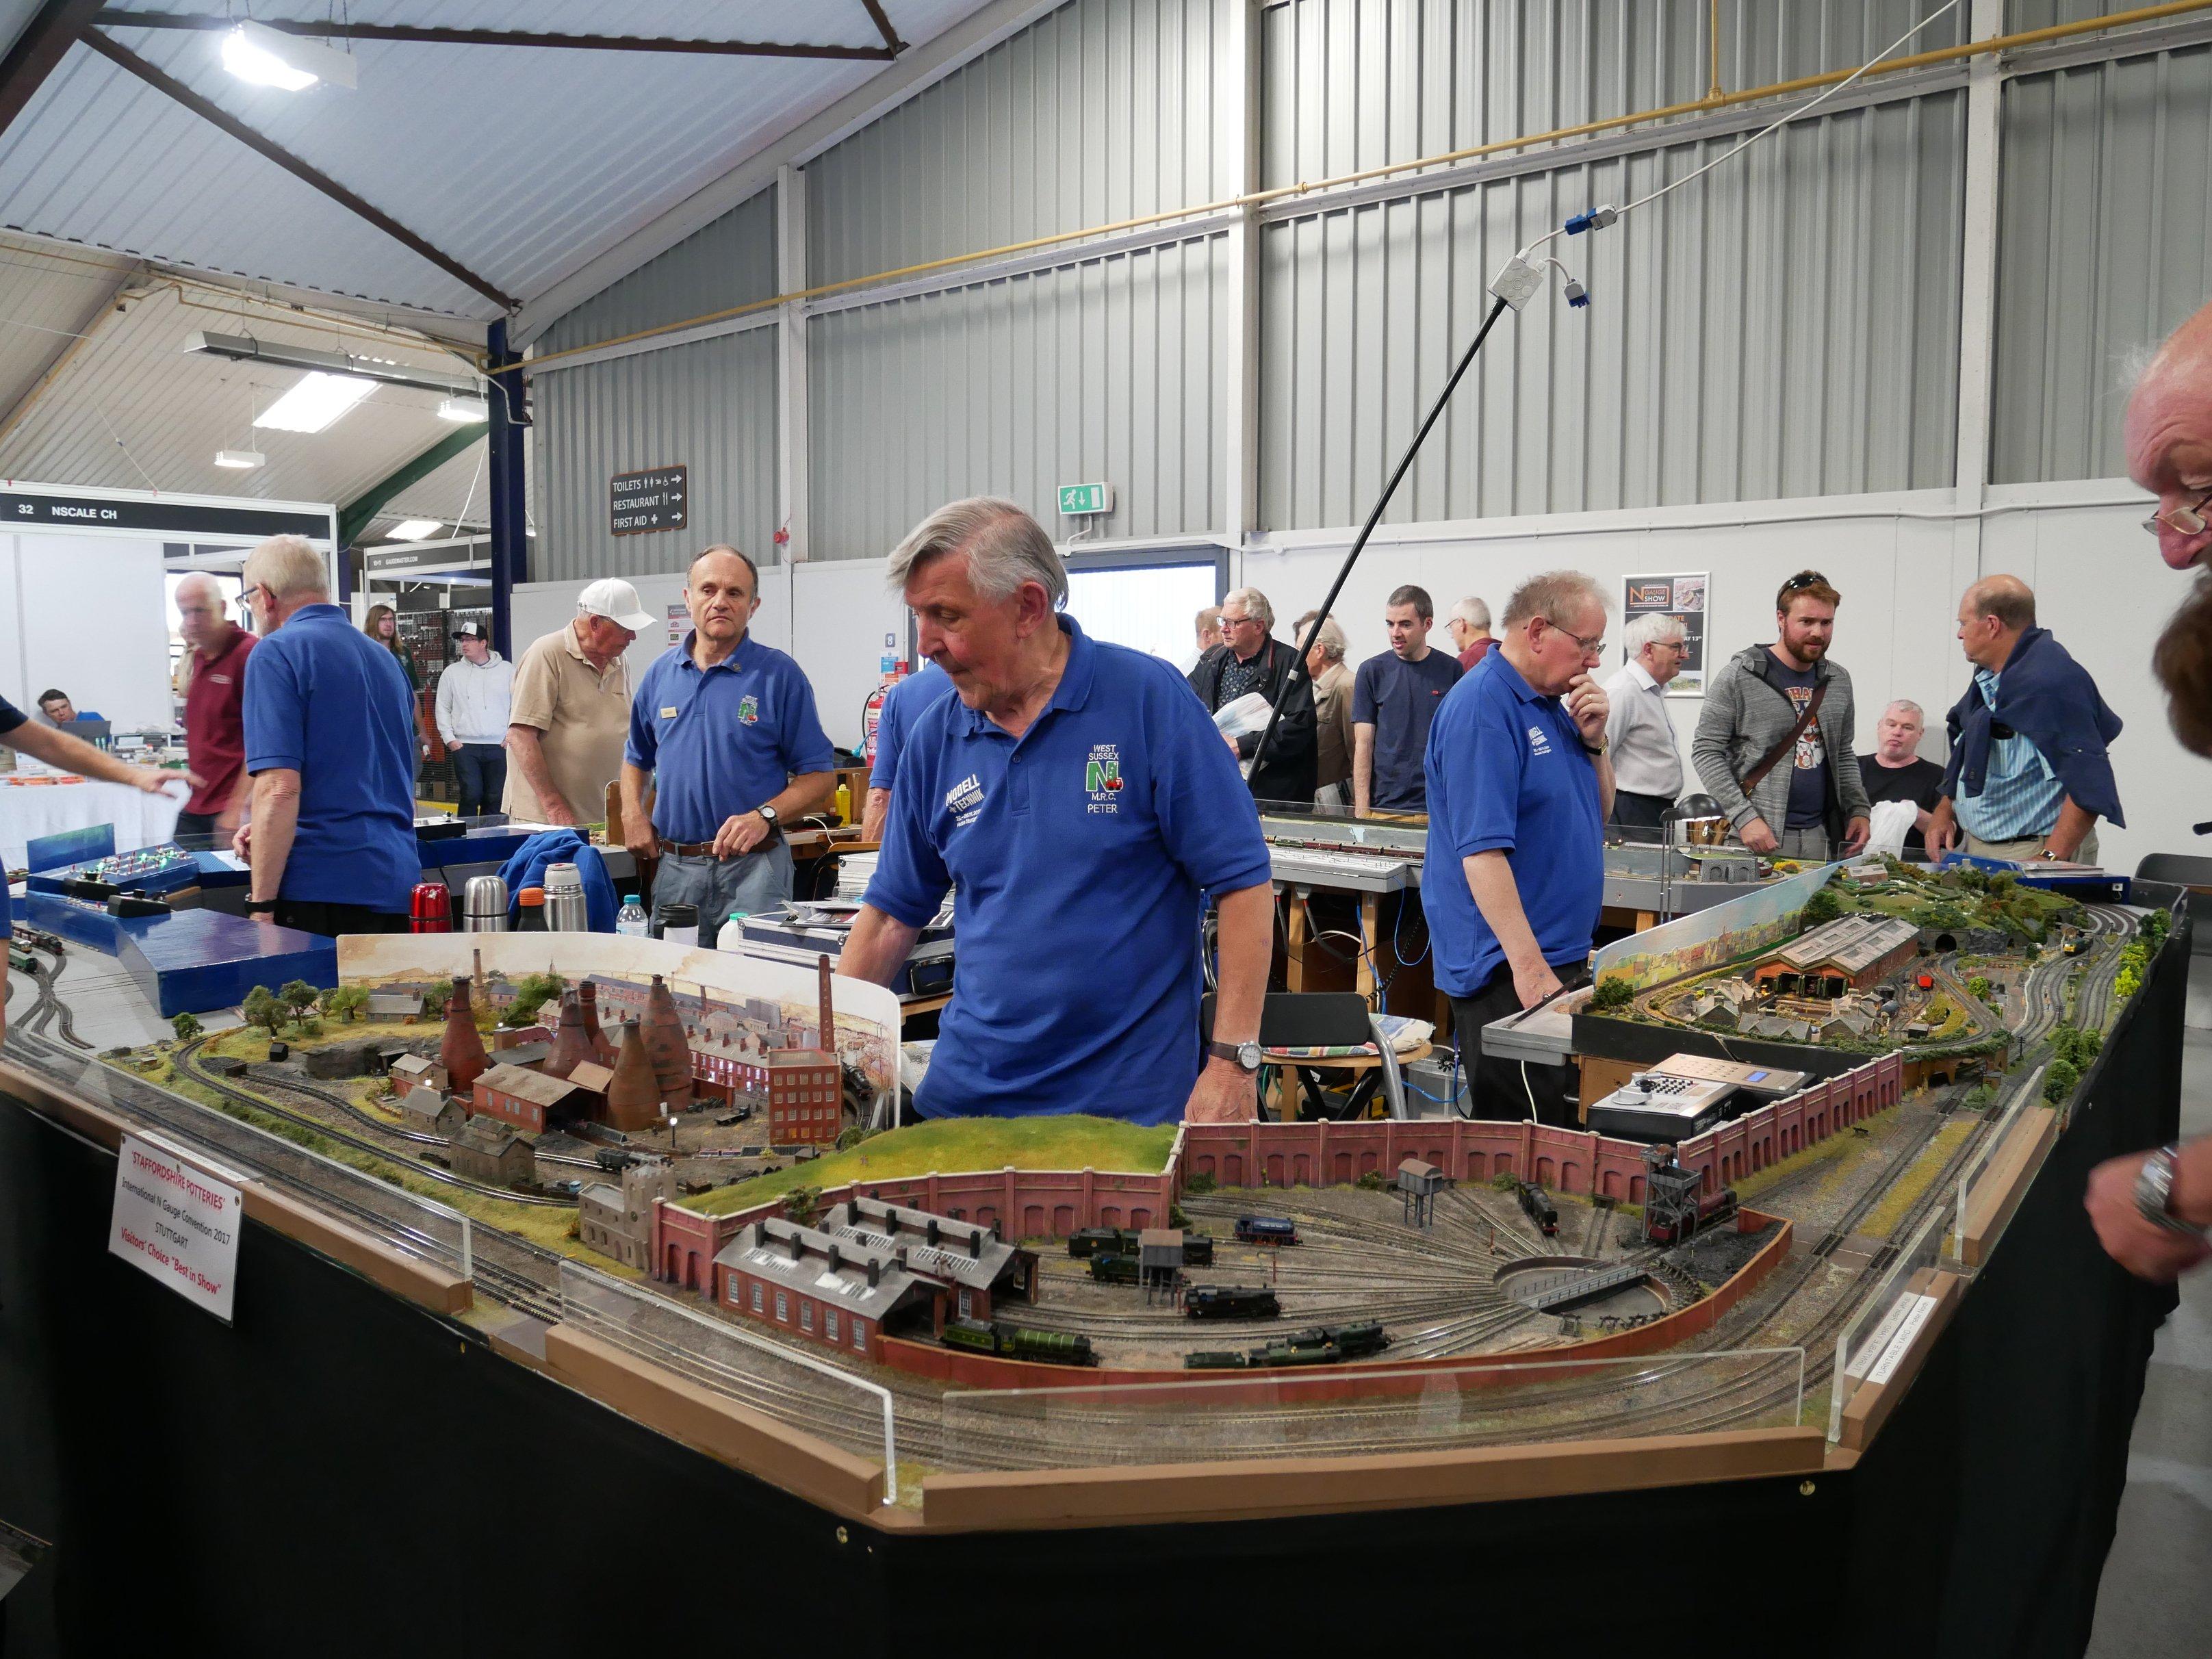 All layouts are made by members at home, to the same standards, and for shows, they are fitted together to make a modular layout